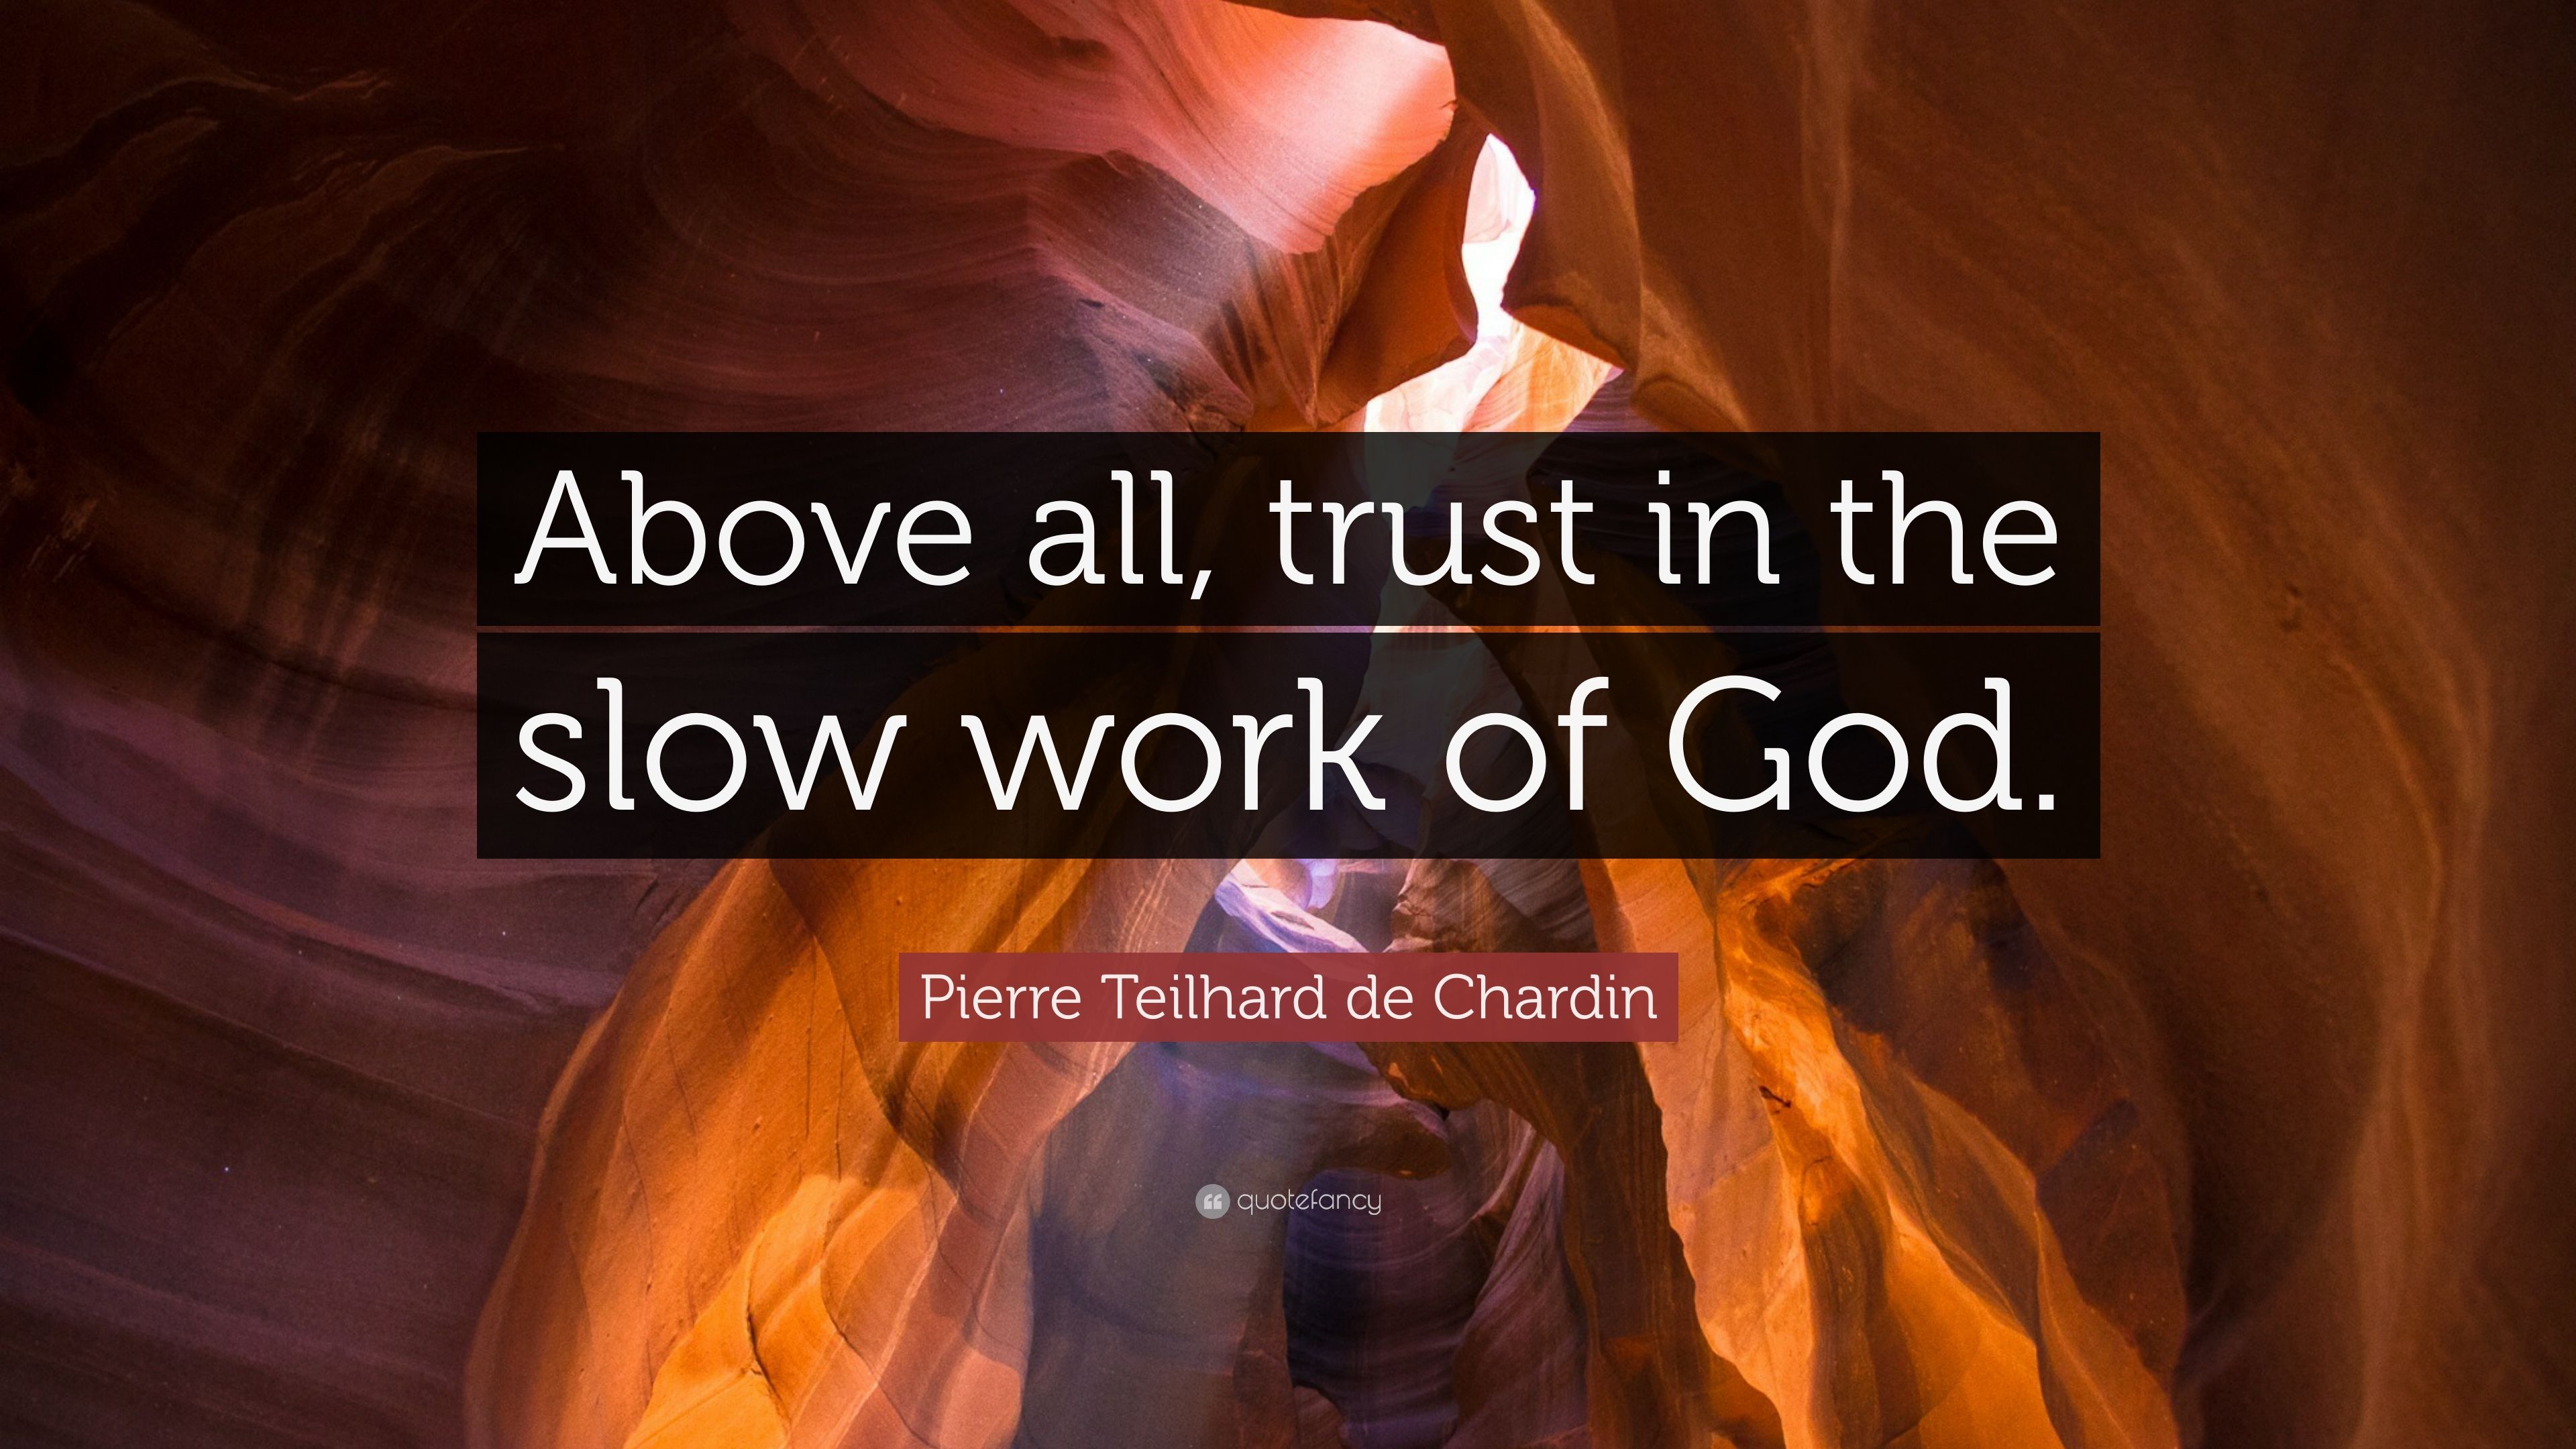 Pierre Teilhard de Chardin Quote: “Above all, trust in the slow work of God.” (9 wallpaper)